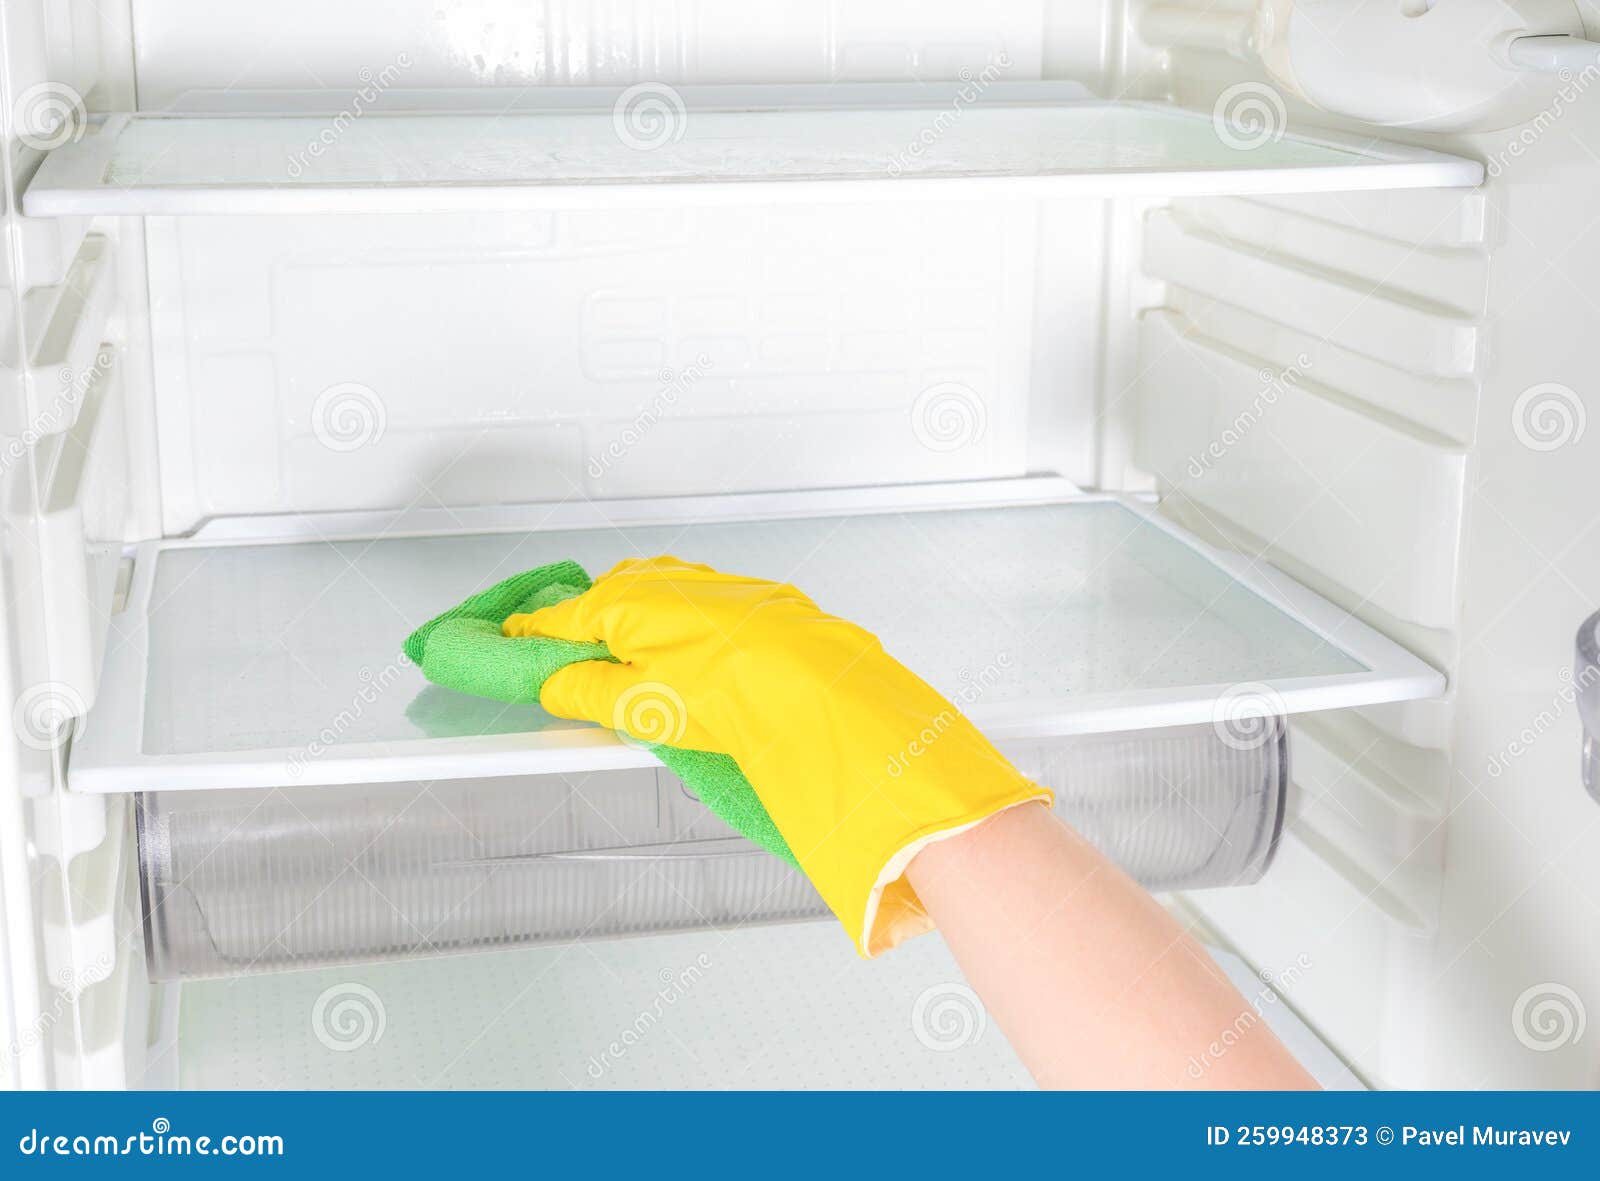 Fridge Cleaning Services